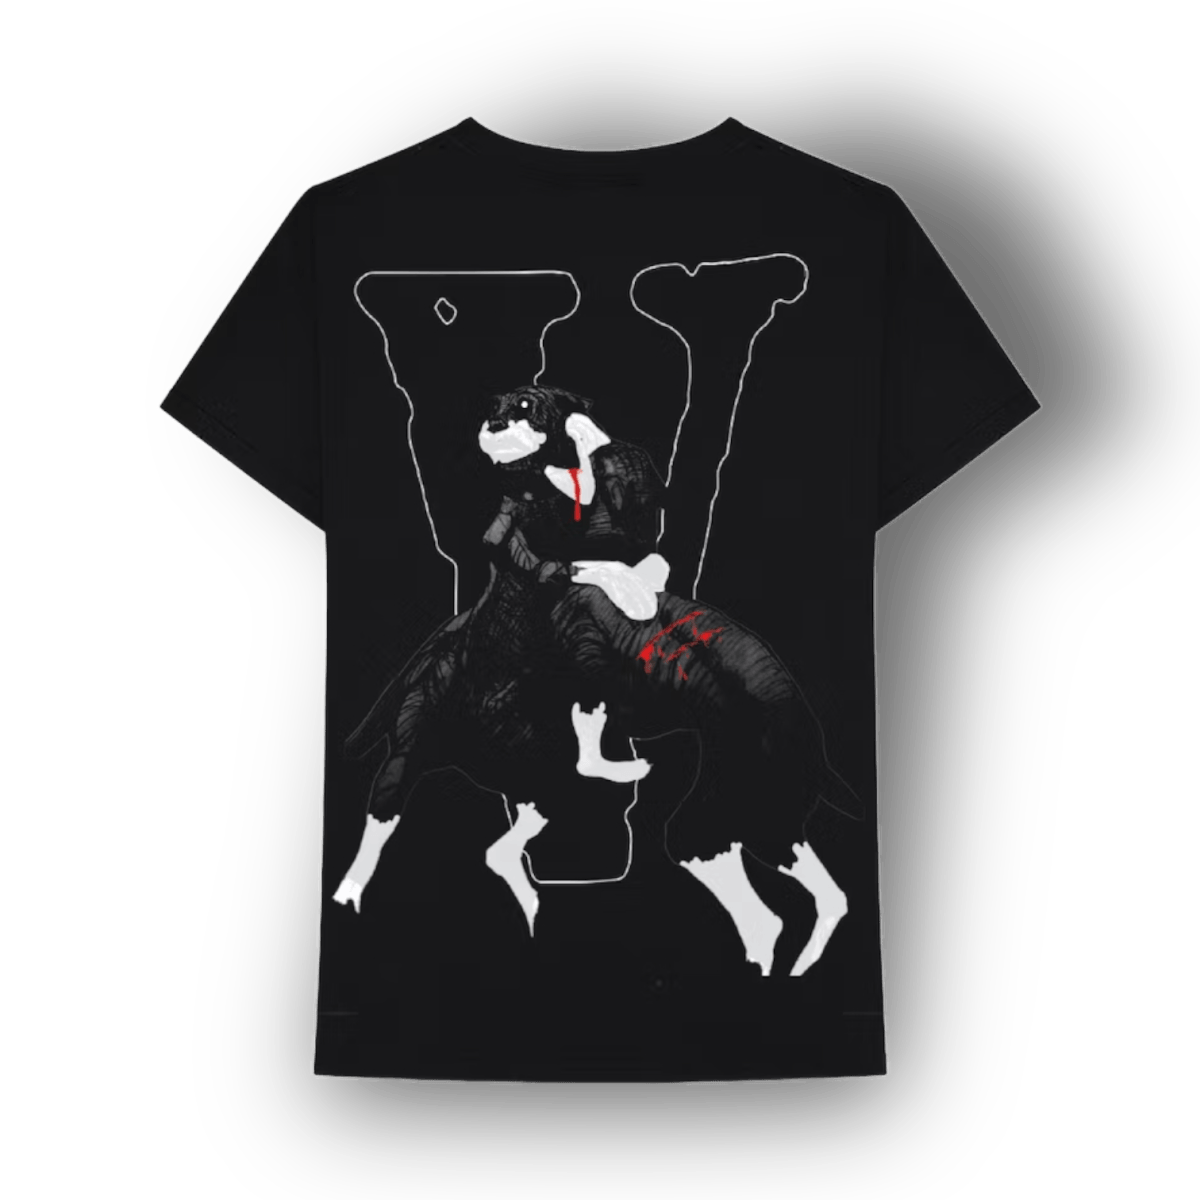 Vlone x City Morgue Dogs Tee Black - T-Shirt - Vlone - Jawns on Fire